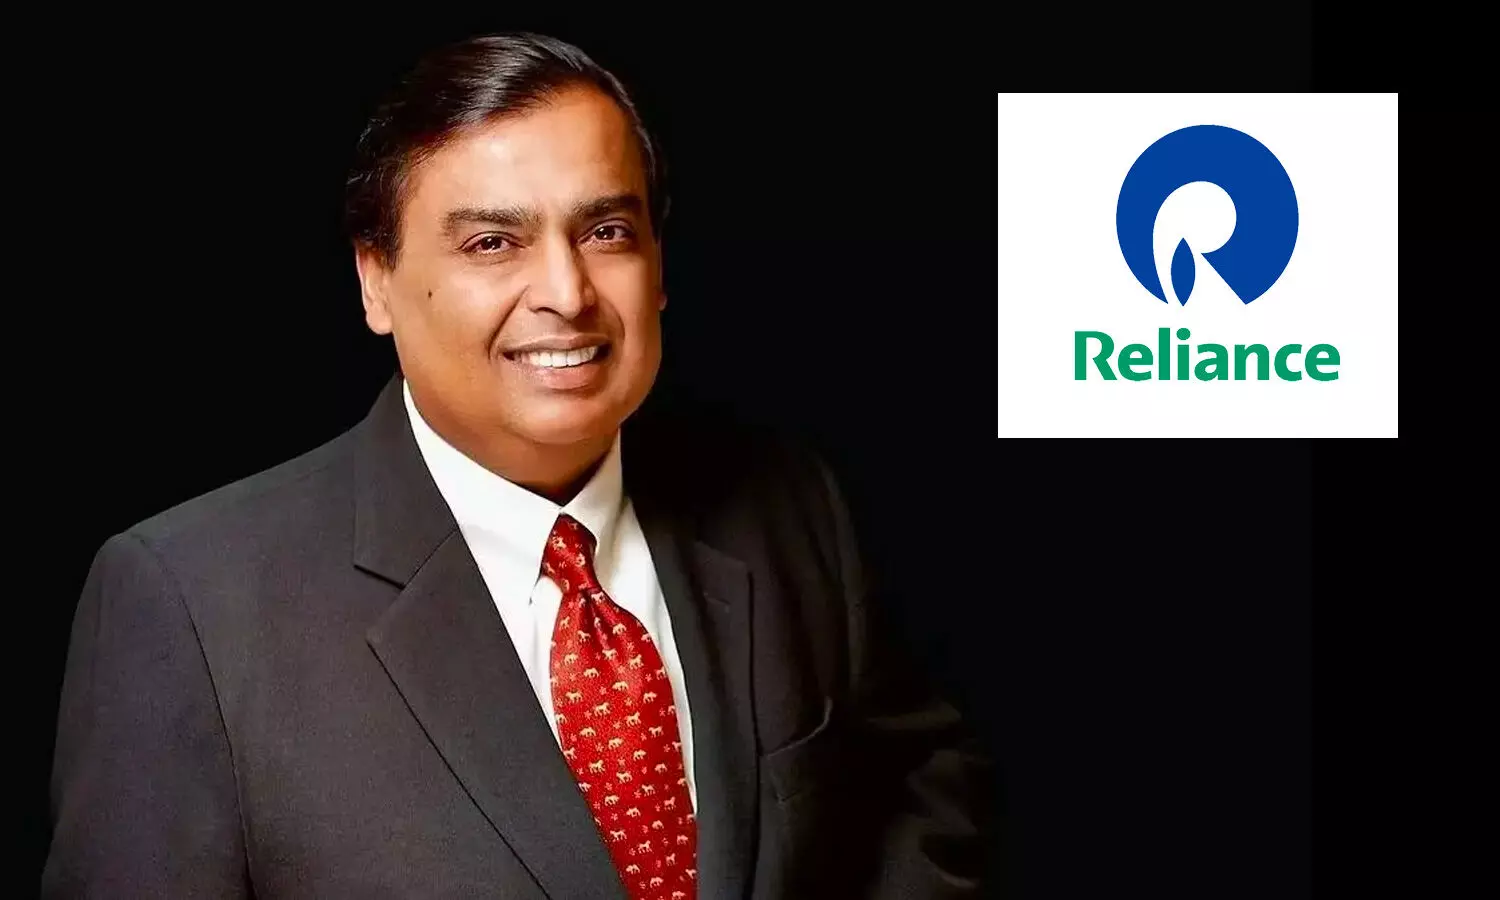 Reliance first company to touch the Rs 20 lakh crore m-cap mark